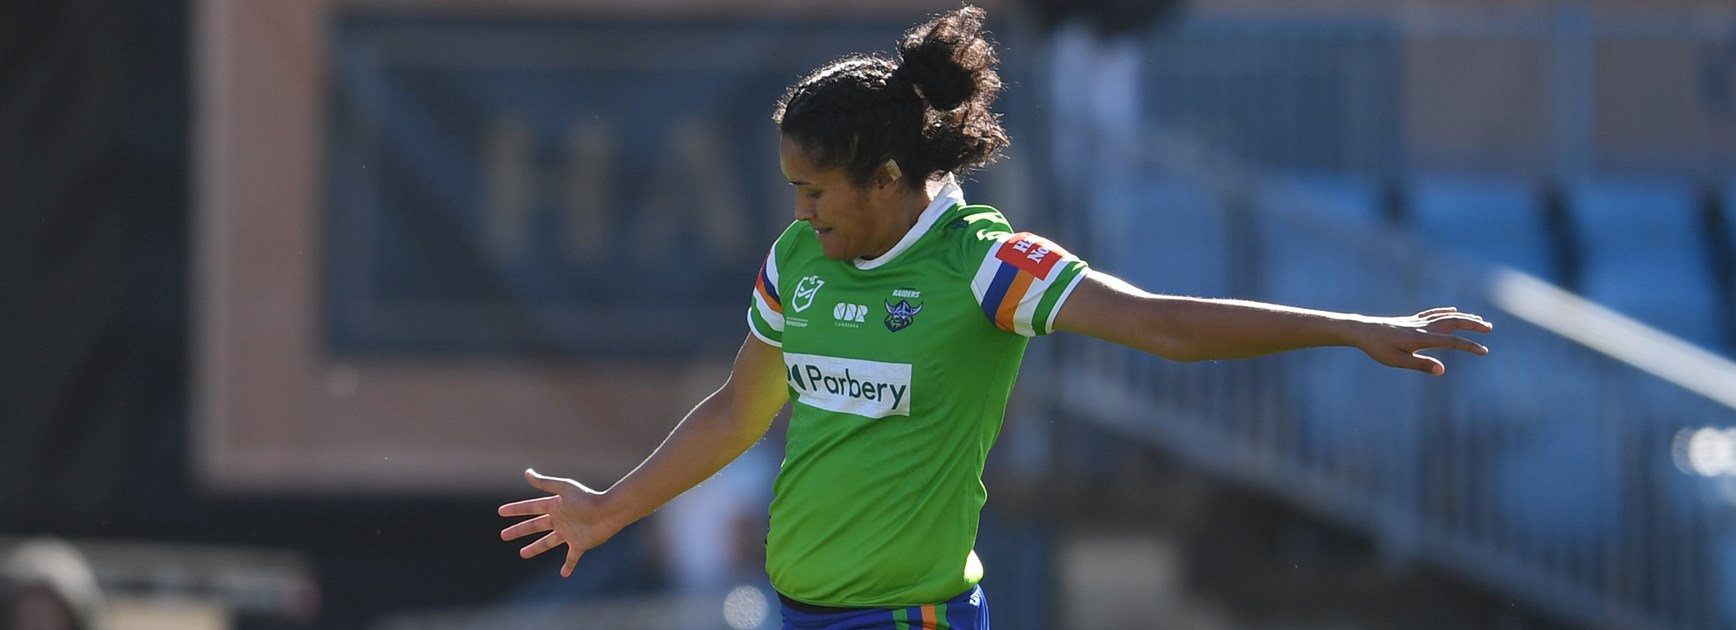 NRLW Match Preview: Raiders v Roosters